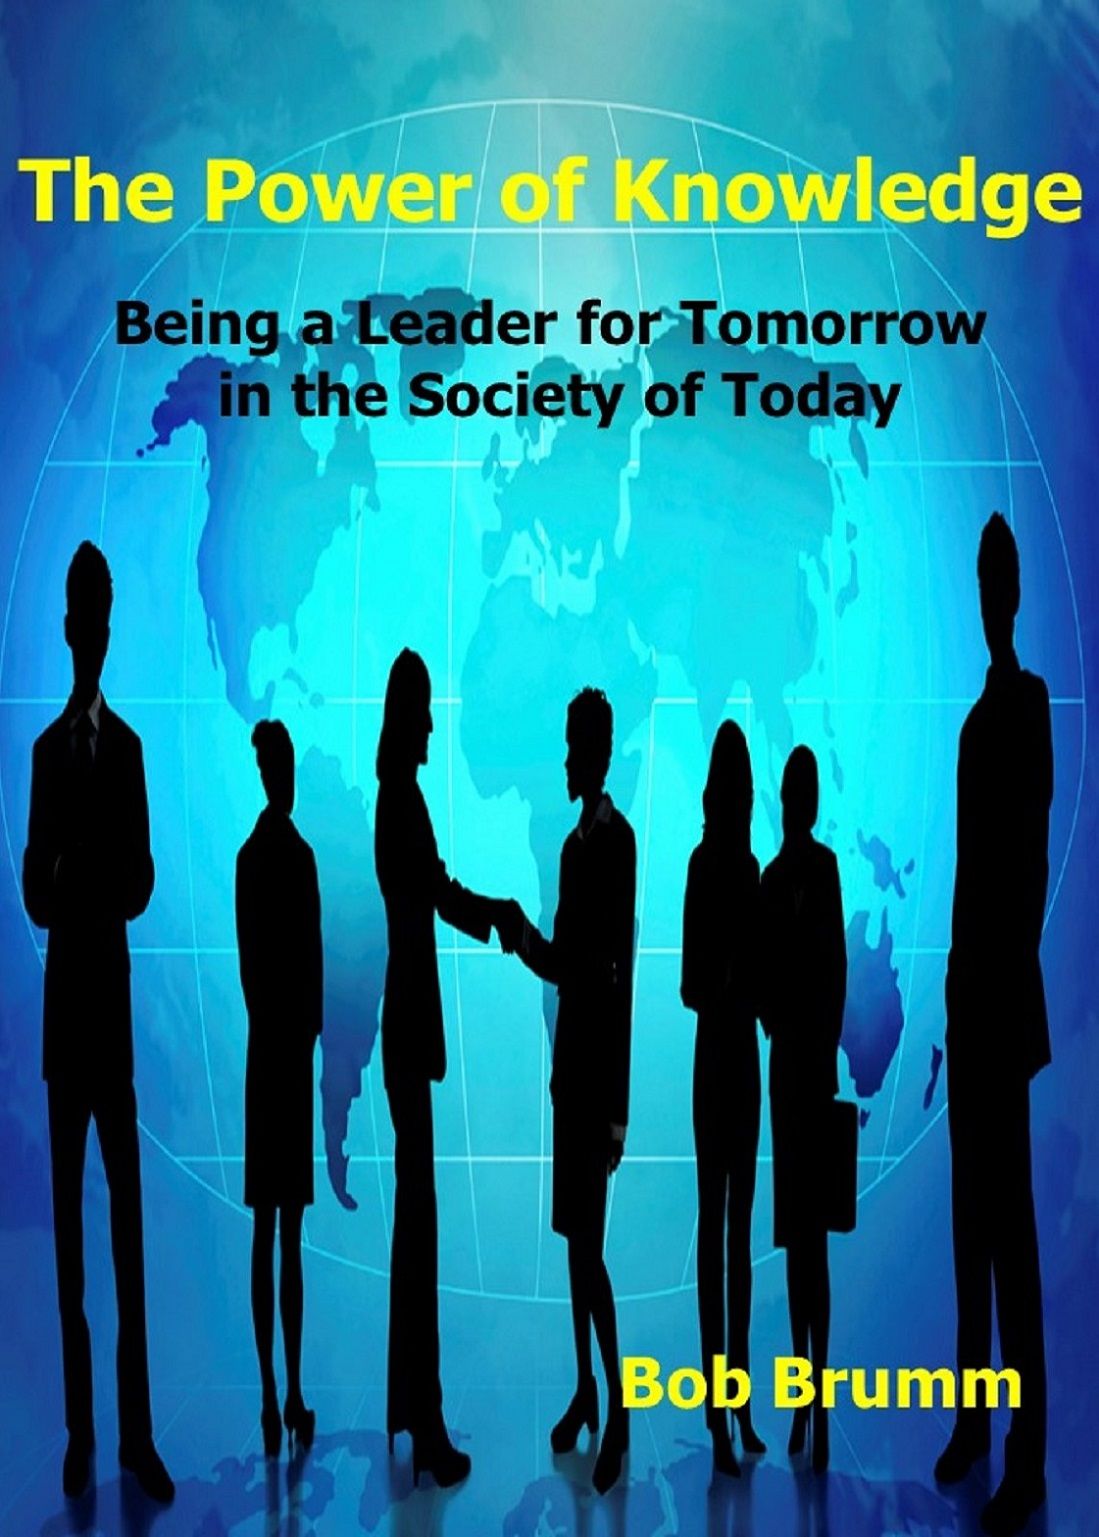 The Power of Knowledge - Being a Leader for Tomorrow in the Society of Today